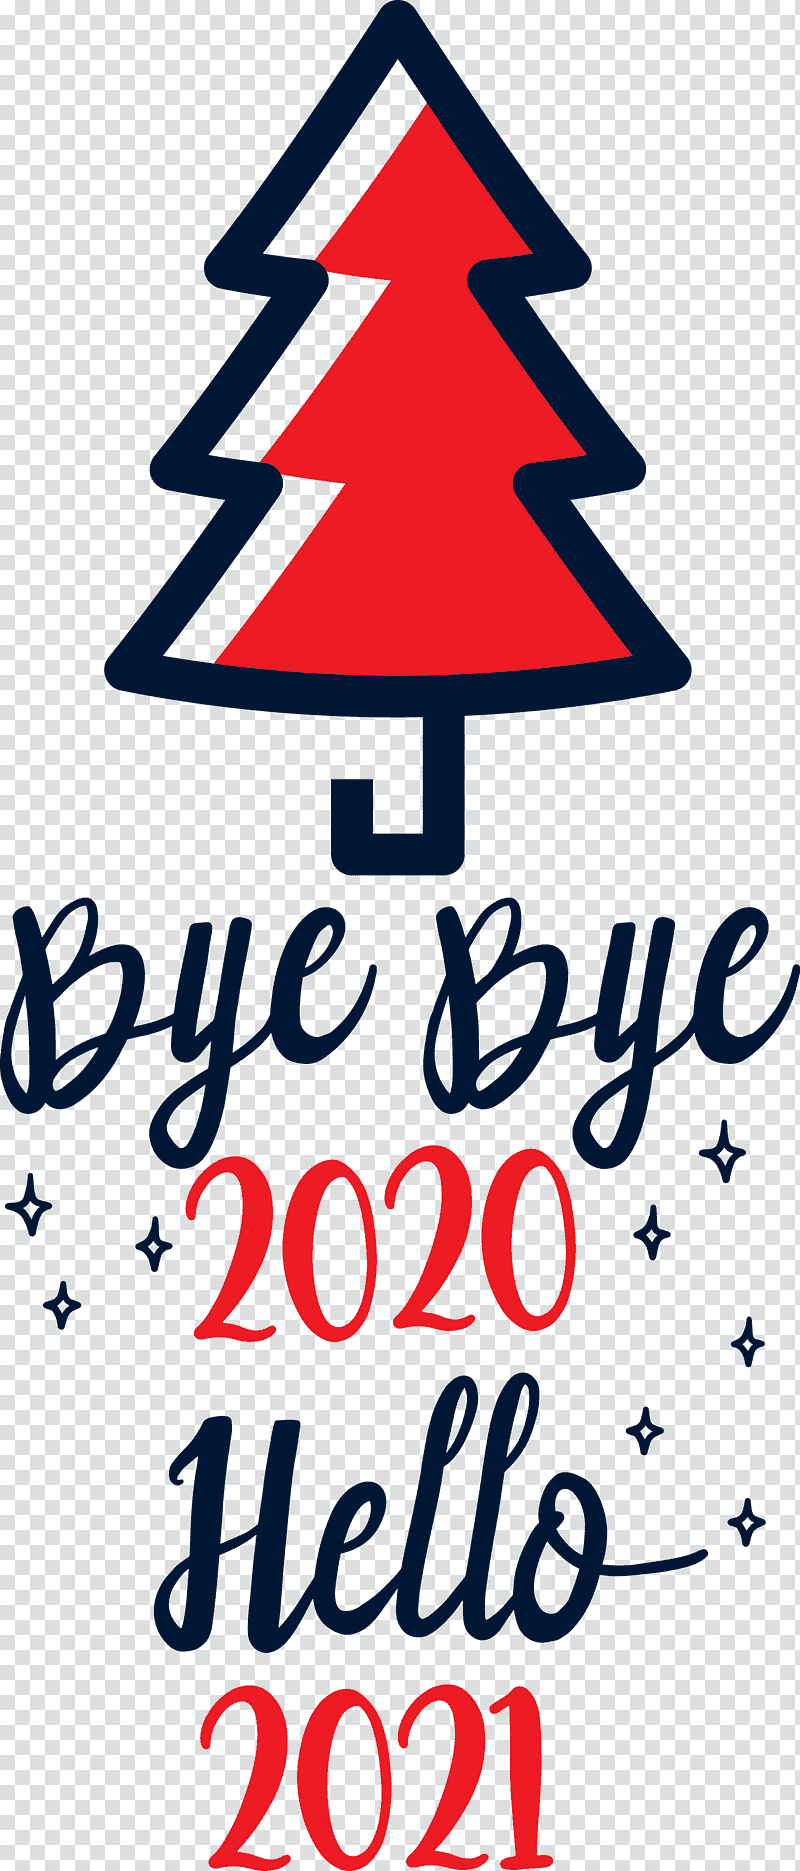 Hello 2021 Year Bye bye 2020 Year, Christmas Day, Abstract Art, Ornament, Logo, Line Art, Creativity transparent background PNG clipart